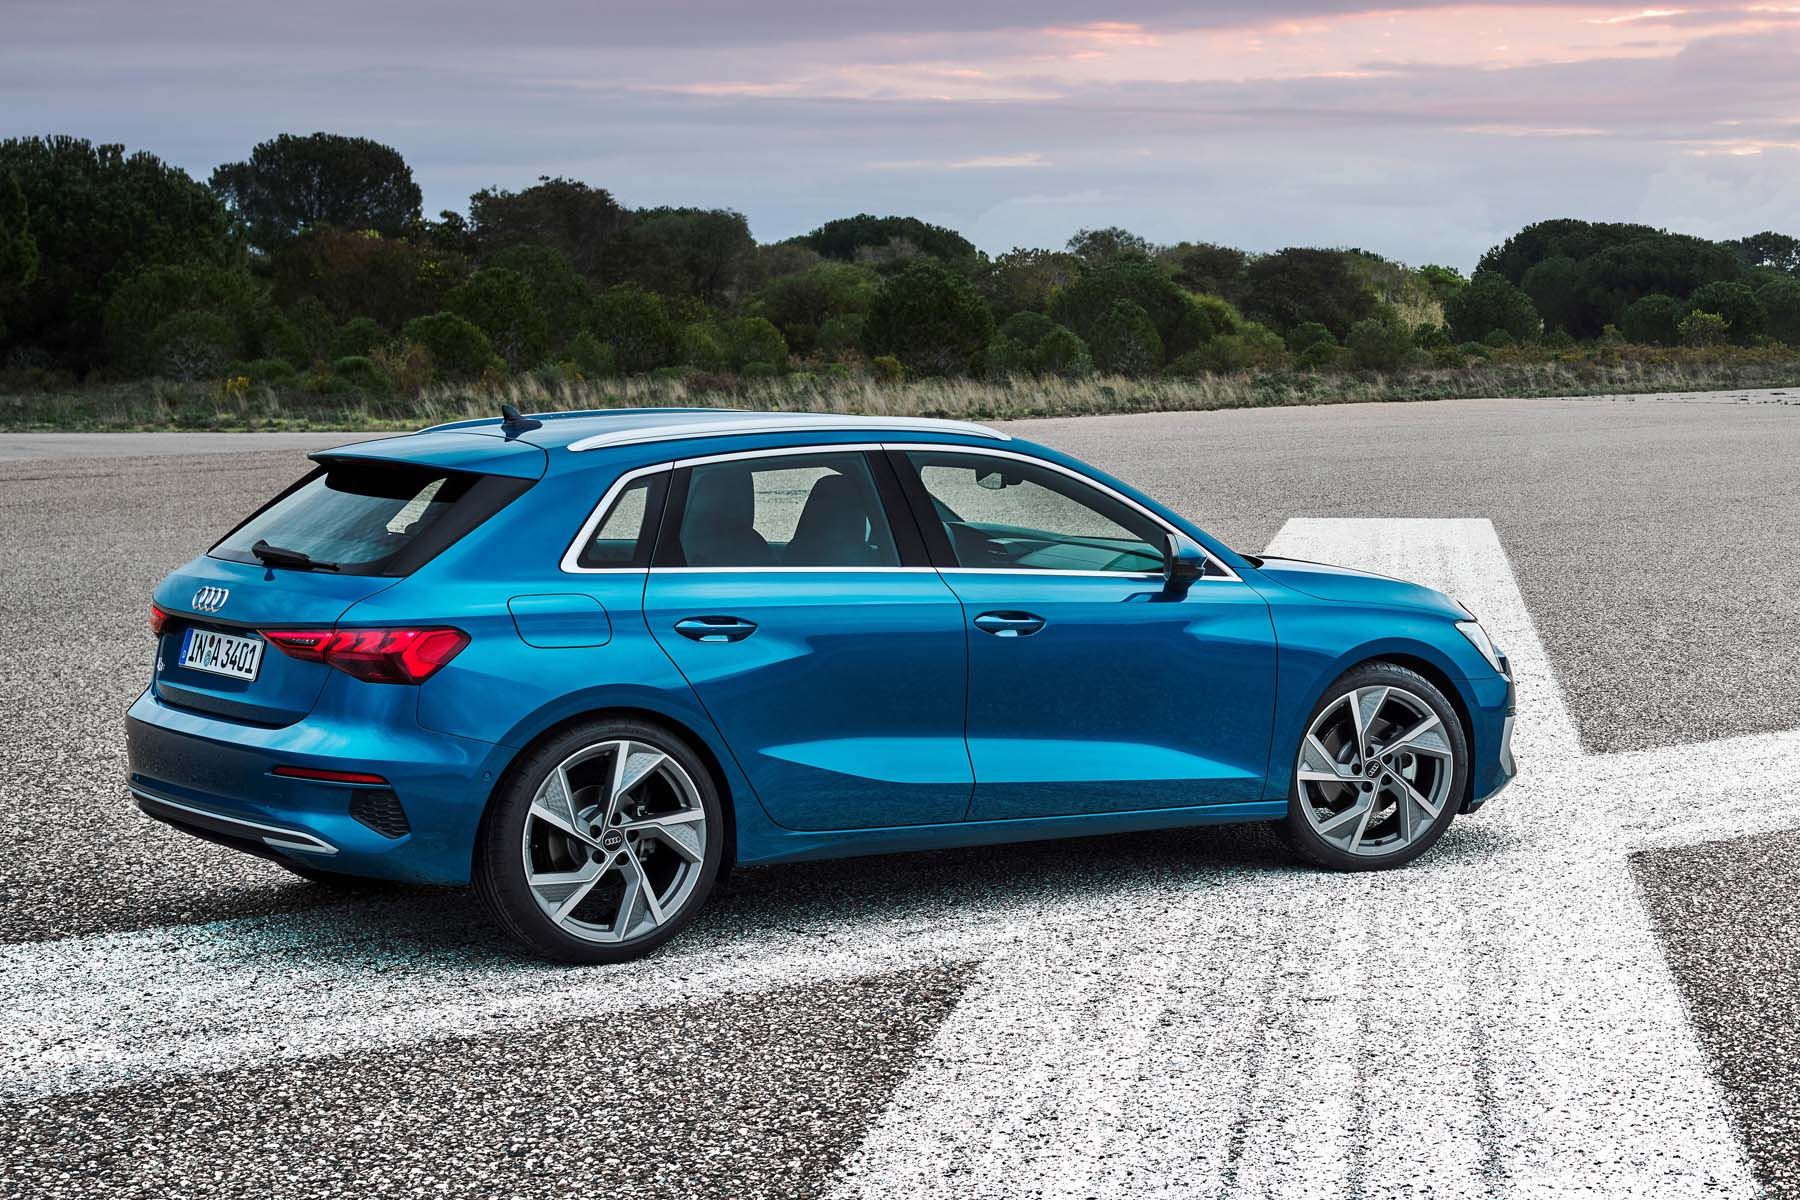 Audi's next-gen A3 Sportback brings grace and some needed space